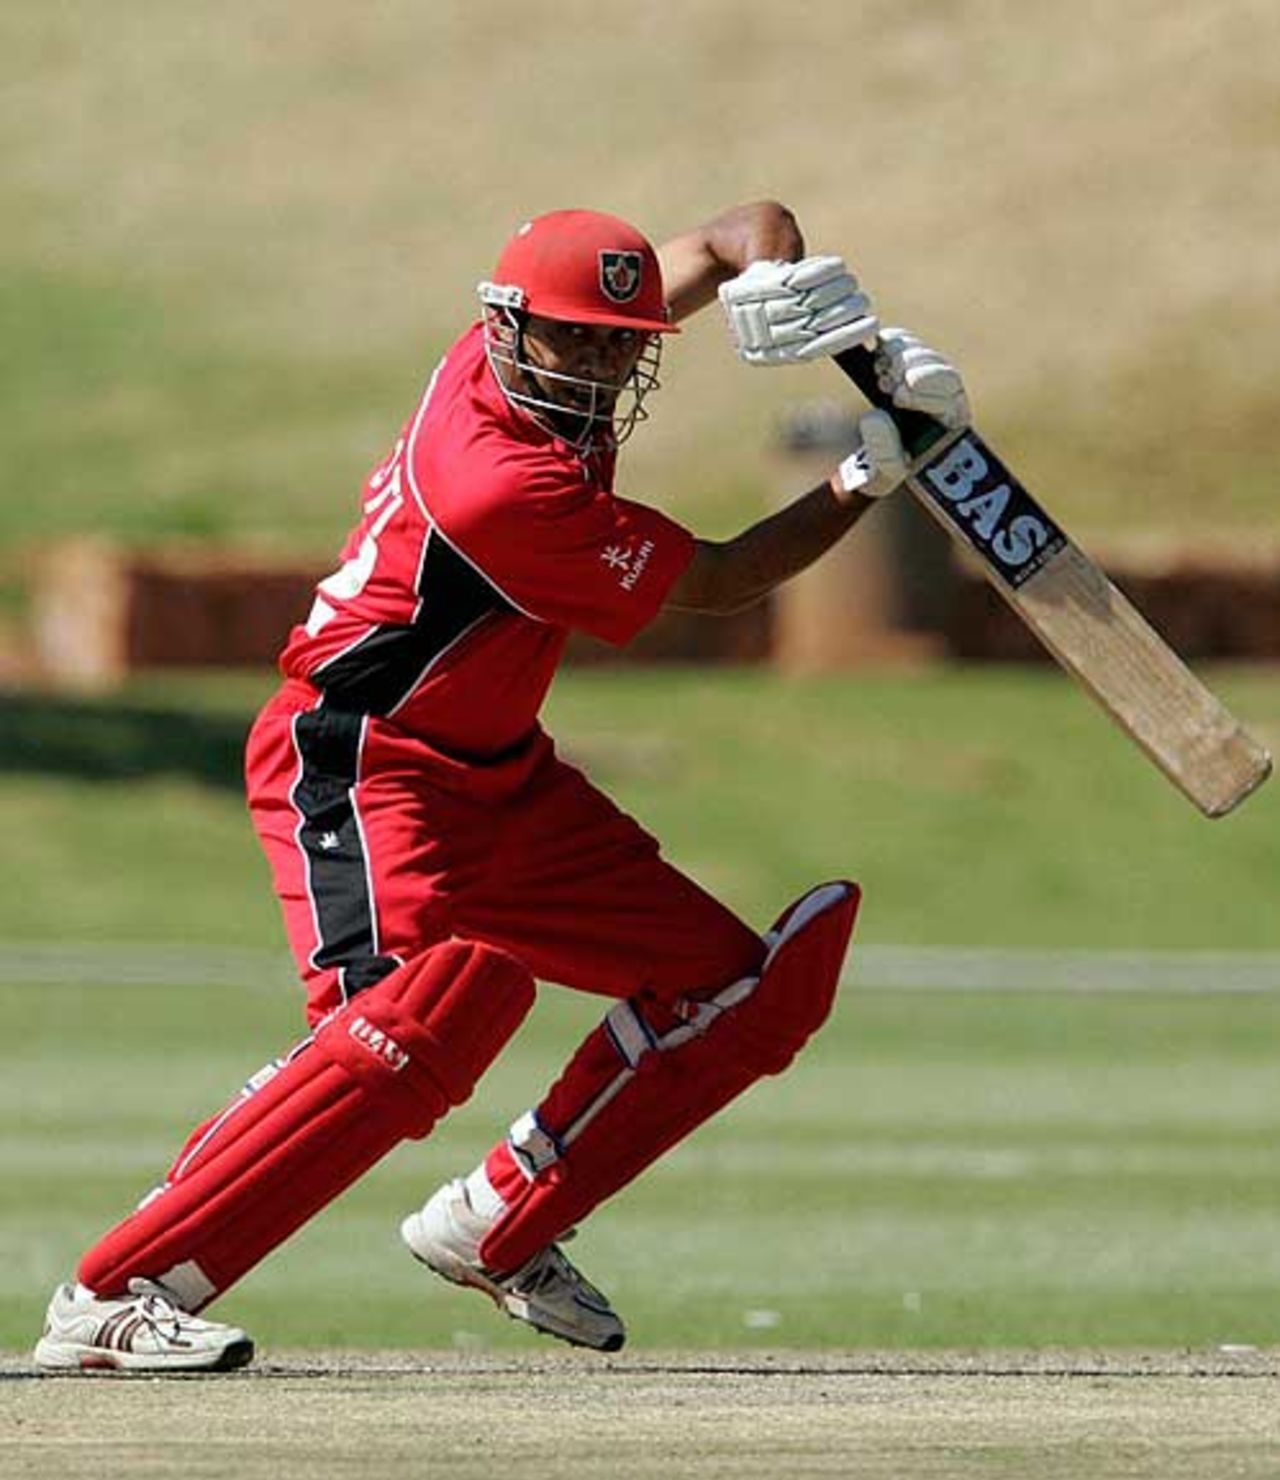 Sandeep Jyoti steers the ball square on the off side, Canada v Netherlands, ICC World Cup Qualifiers, Super Eights, Johannesburg, April 17, 2009